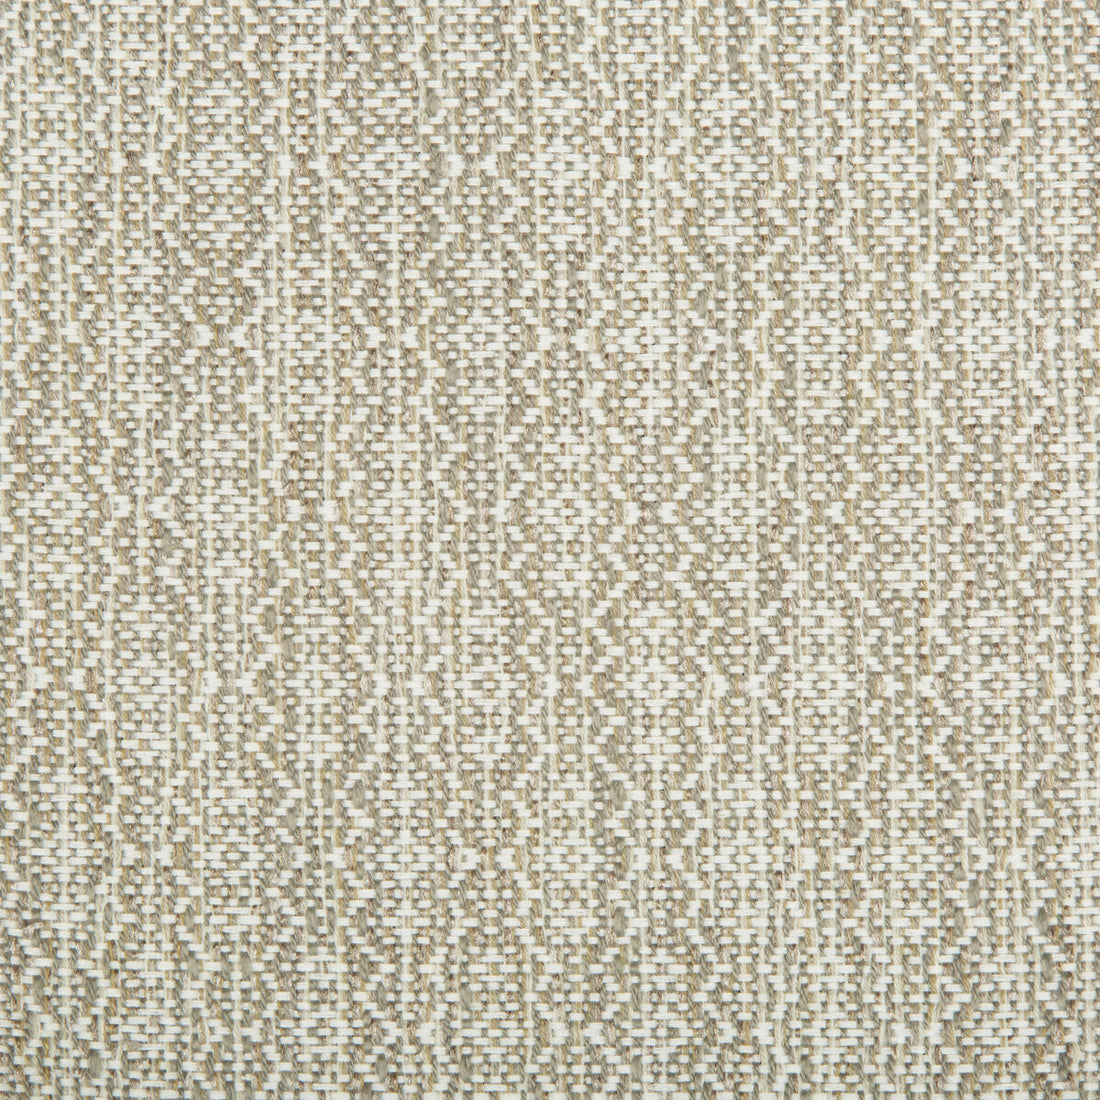 Kravet Smart fabric in 34625-1611 color - pattern 34625.1611.0 - by Kravet Smart in the Performance Crypton Home collection